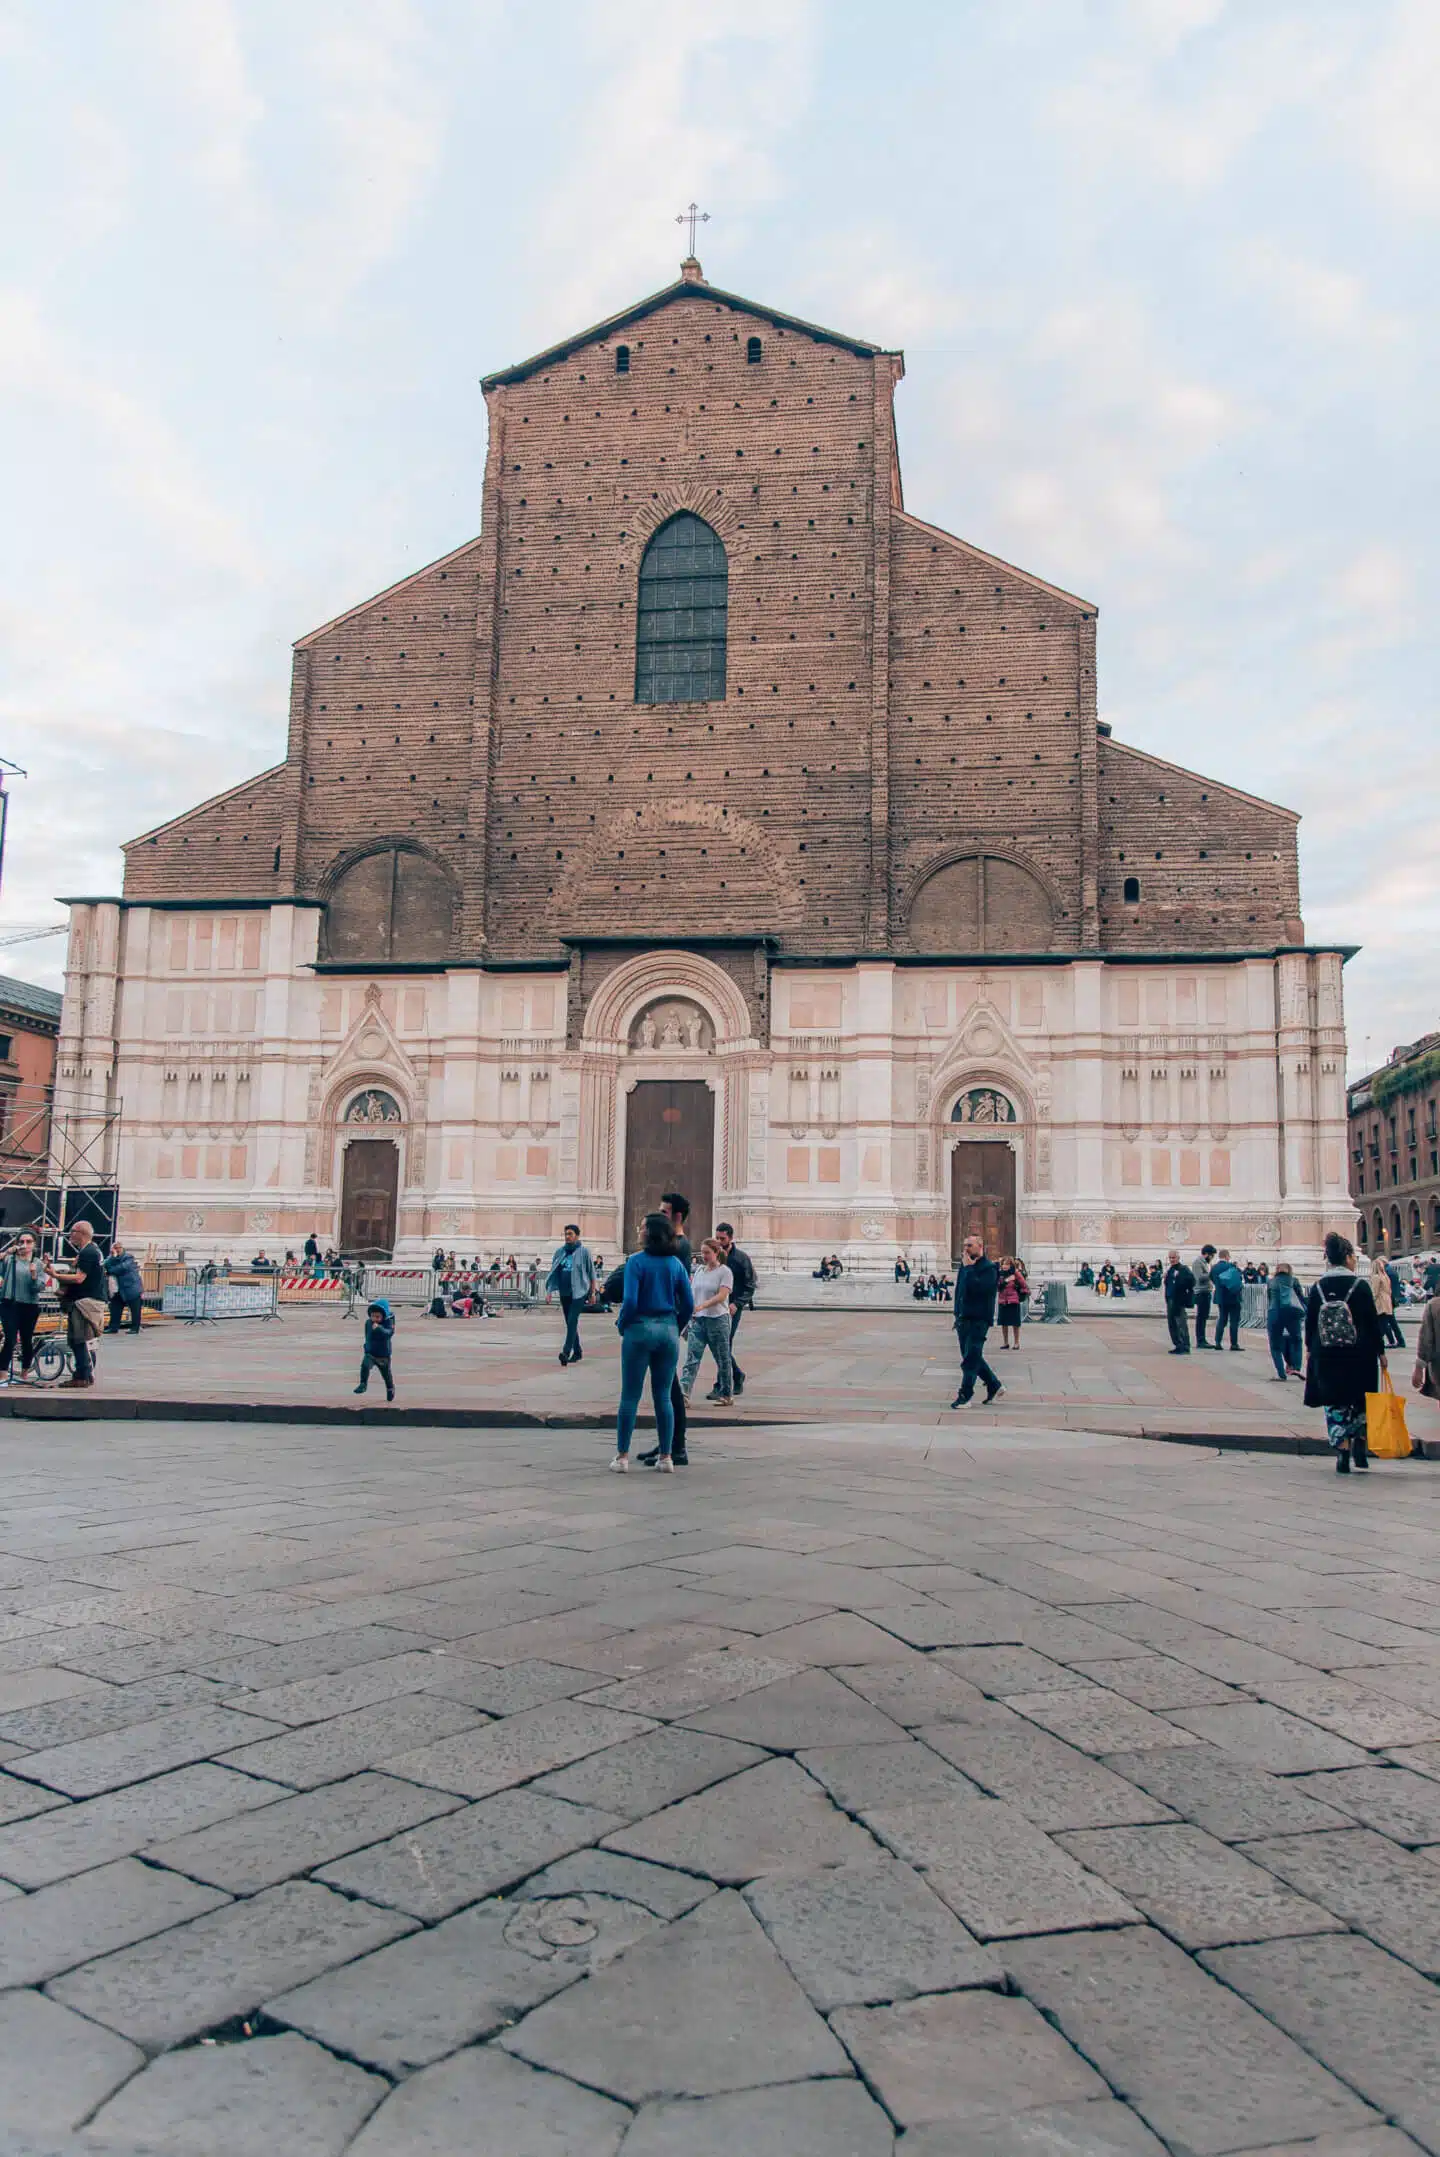 What to do in Bologna, by travel blogger What The Fab